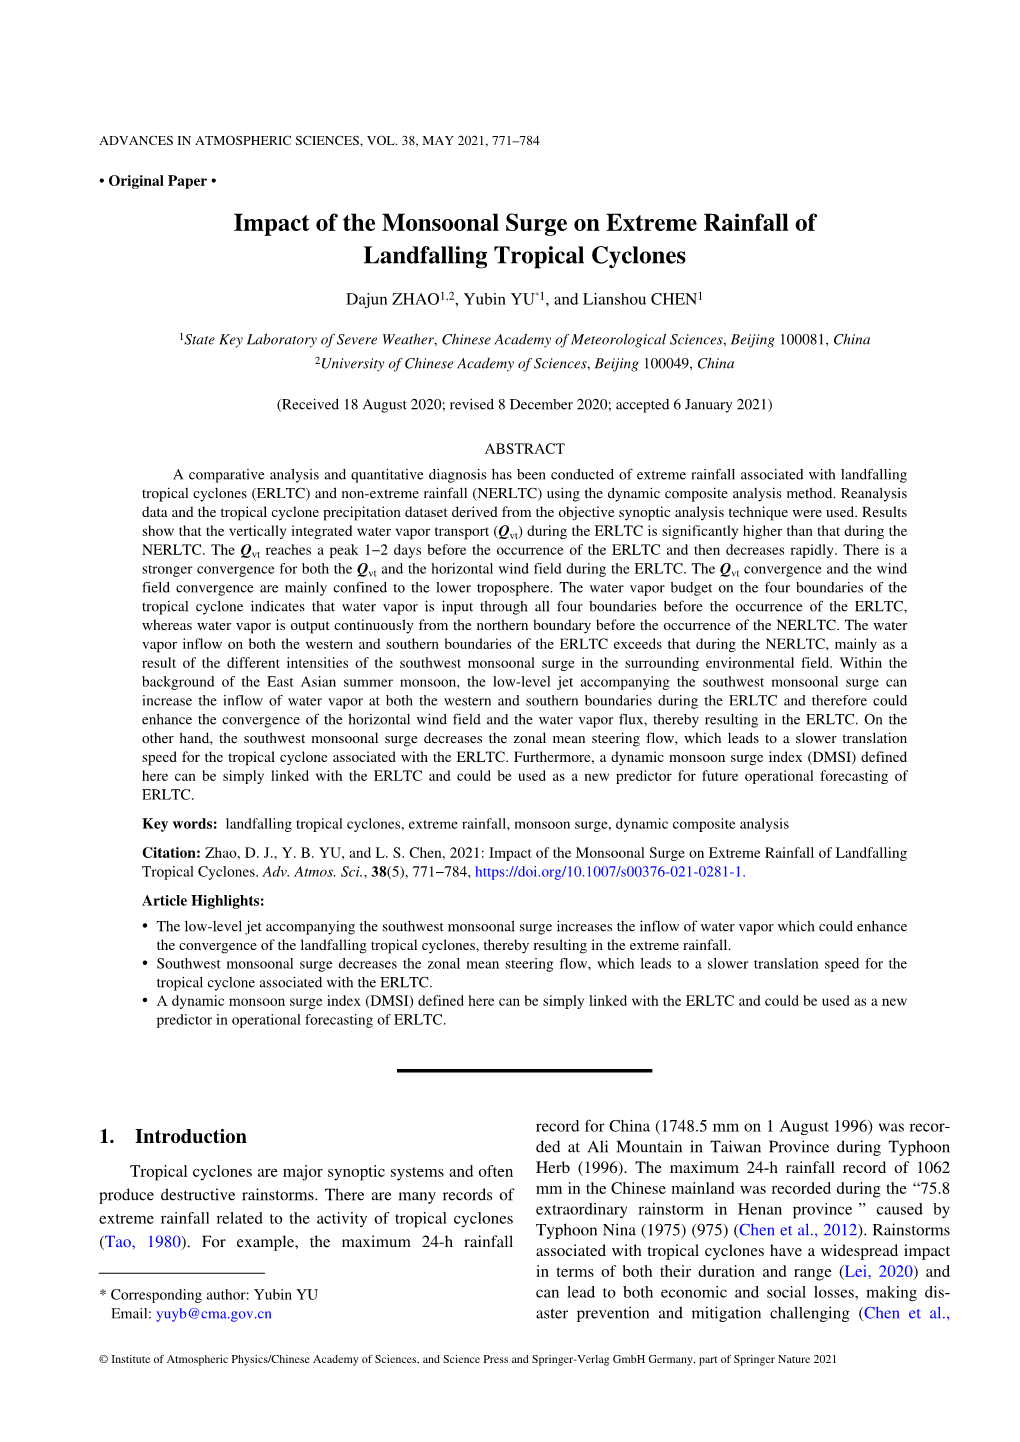 Impact of the Monsoonal Surge on Extreme Rainfall of Landfalling Tropical Cyclones